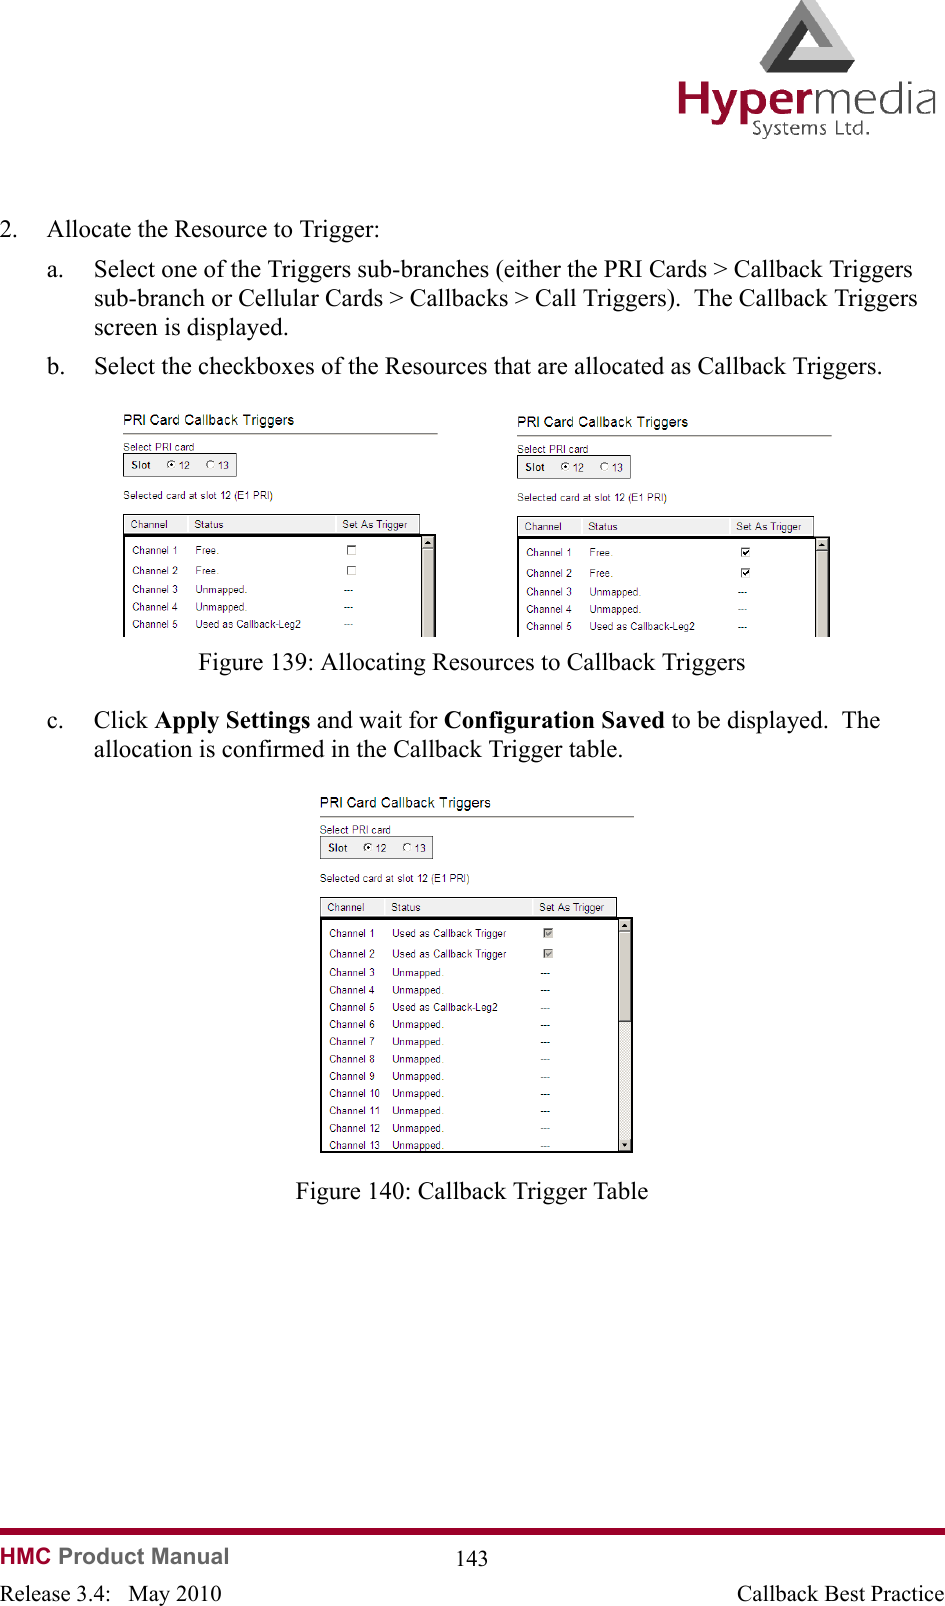 HMC Product Manual  143Release 3.4:   May 2010 Callback Best Practice2. Allocate the Resource to Trigger:a. Select one of the Triggers sub-branches (either the PRI Cards &gt; Callback Triggers sub-branch or Cellular Cards &gt; Callbacks &gt; Call Triggers).  The Callback Triggers screen is displayed.b. Select the checkboxes of the Resources that are allocated as Callback Triggers.              Figure 139: Allocating Resources to Callback Triggersc. Click Apply Settings and wait for Configuration Saved to be displayed.  The allocation is confirmed in the Callback Trigger table.              Figure 140: Callback Trigger Table